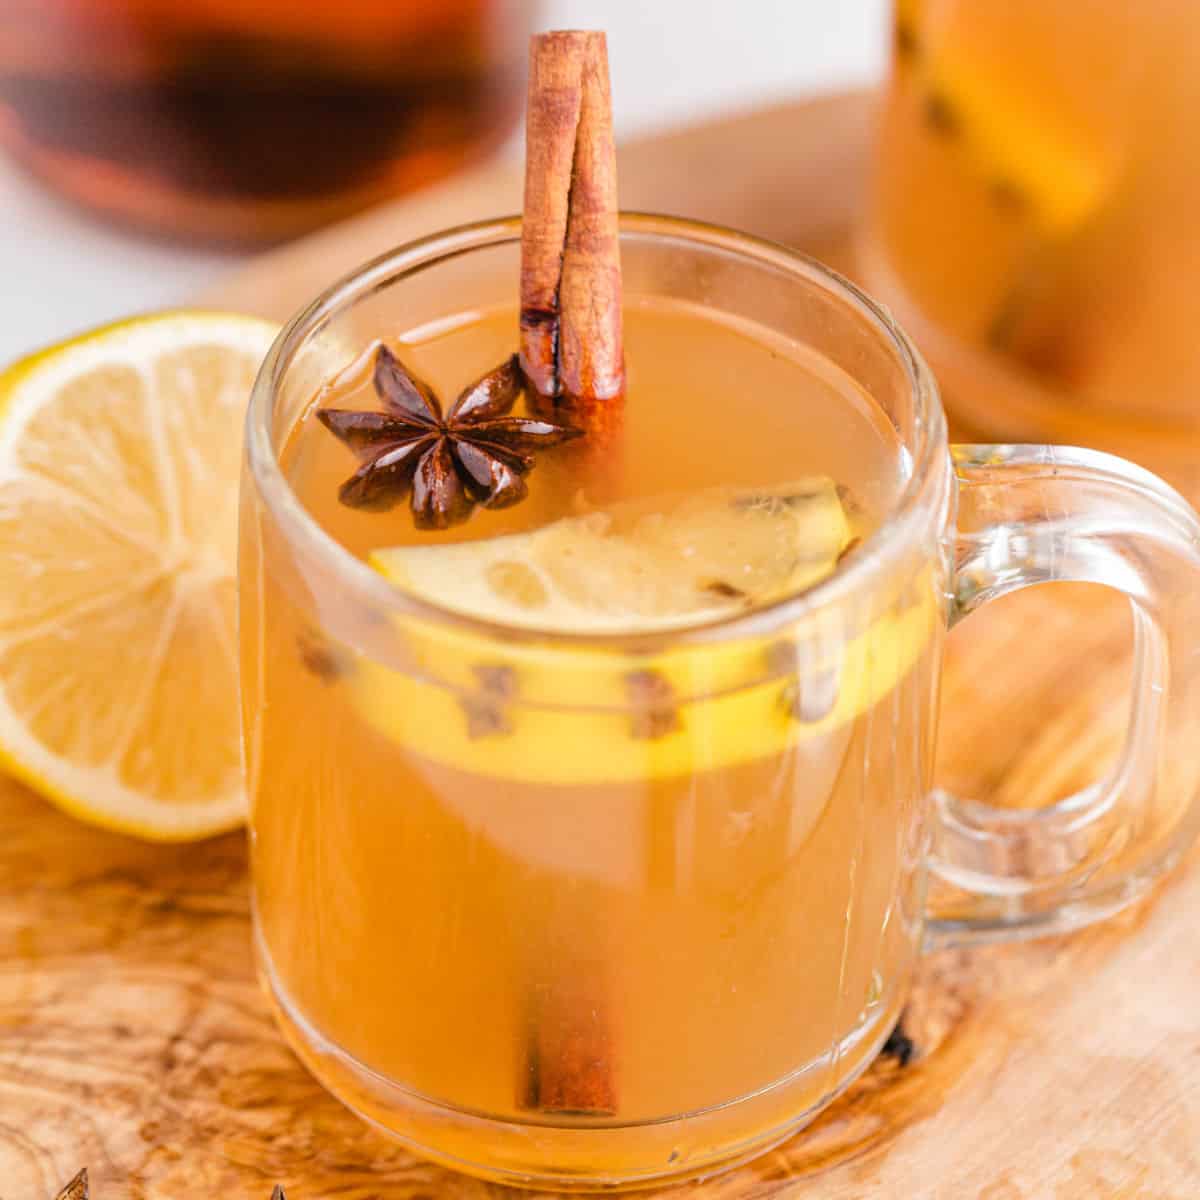 Classic Hot Toddy Recipe - Recipes For Holidays